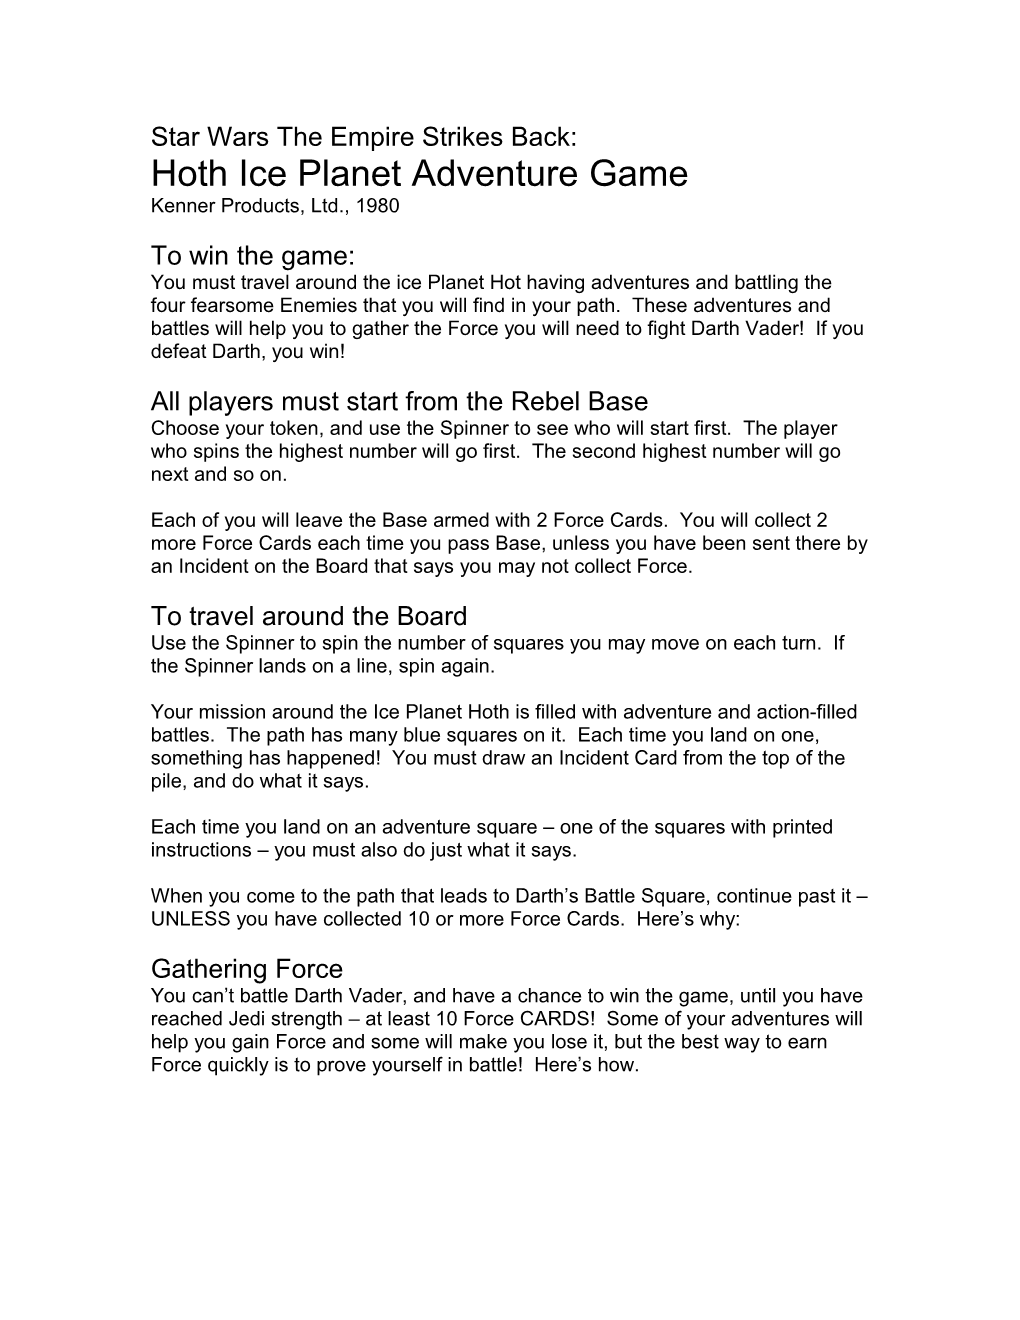 Star Wars the Empire Strikes Back: Hoth Ice Planet Adventure Game Kenner Products, Ltd., 1980